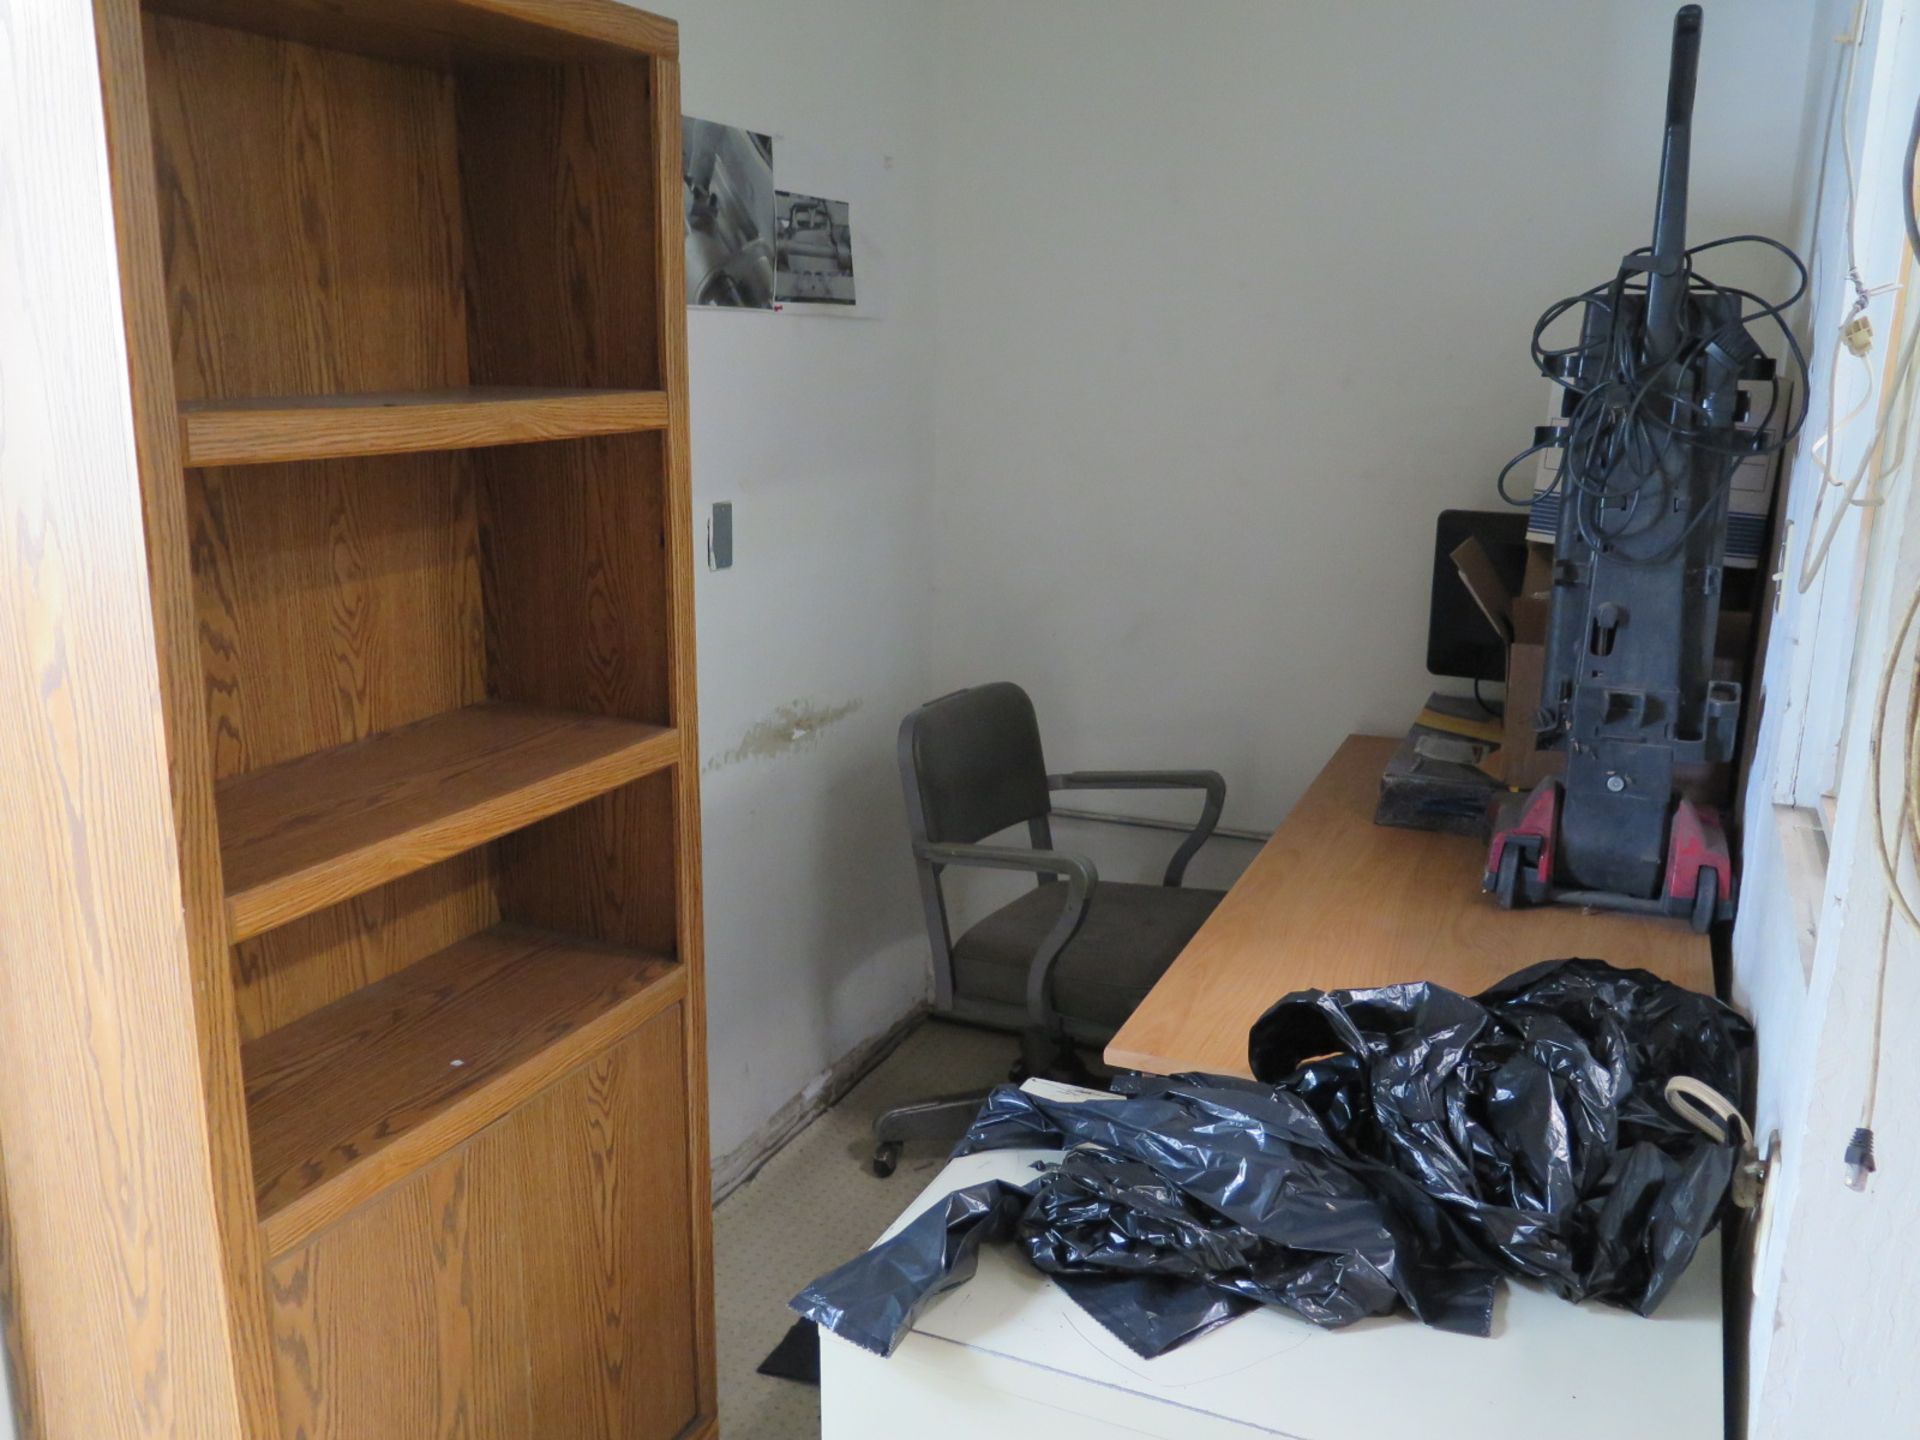 Contents of Office Desks, Chairs, File Cabinets and Misc - Image 3 of 3